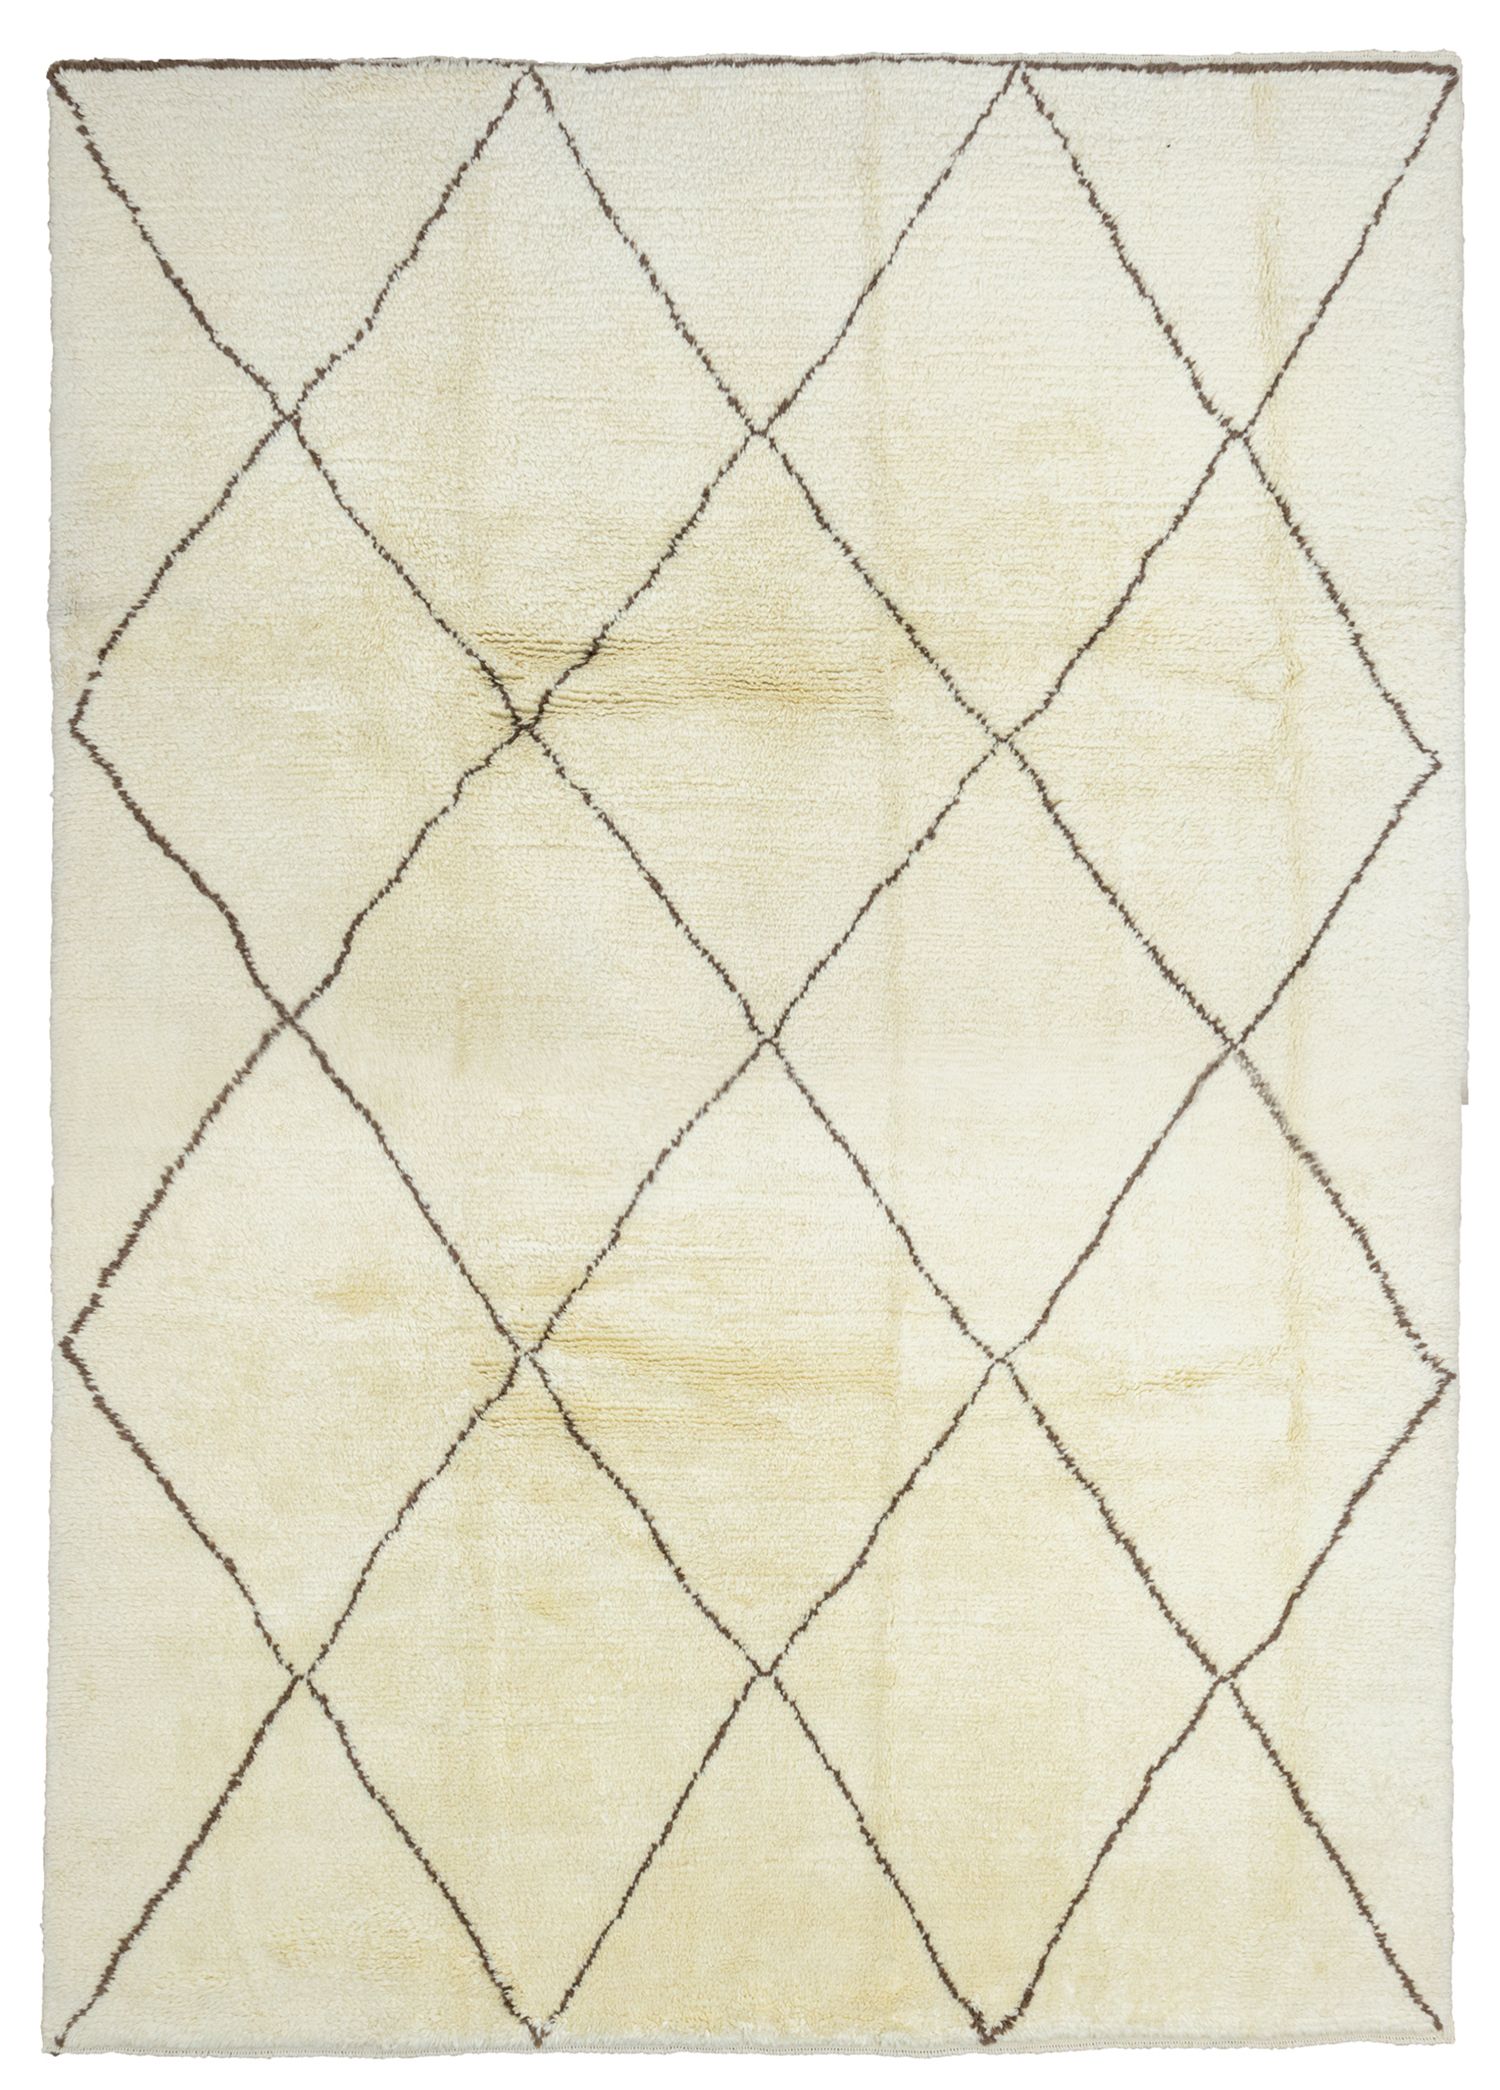 Tanca Hand-Woven Moroccan Style Wool Rug 276x378 cm